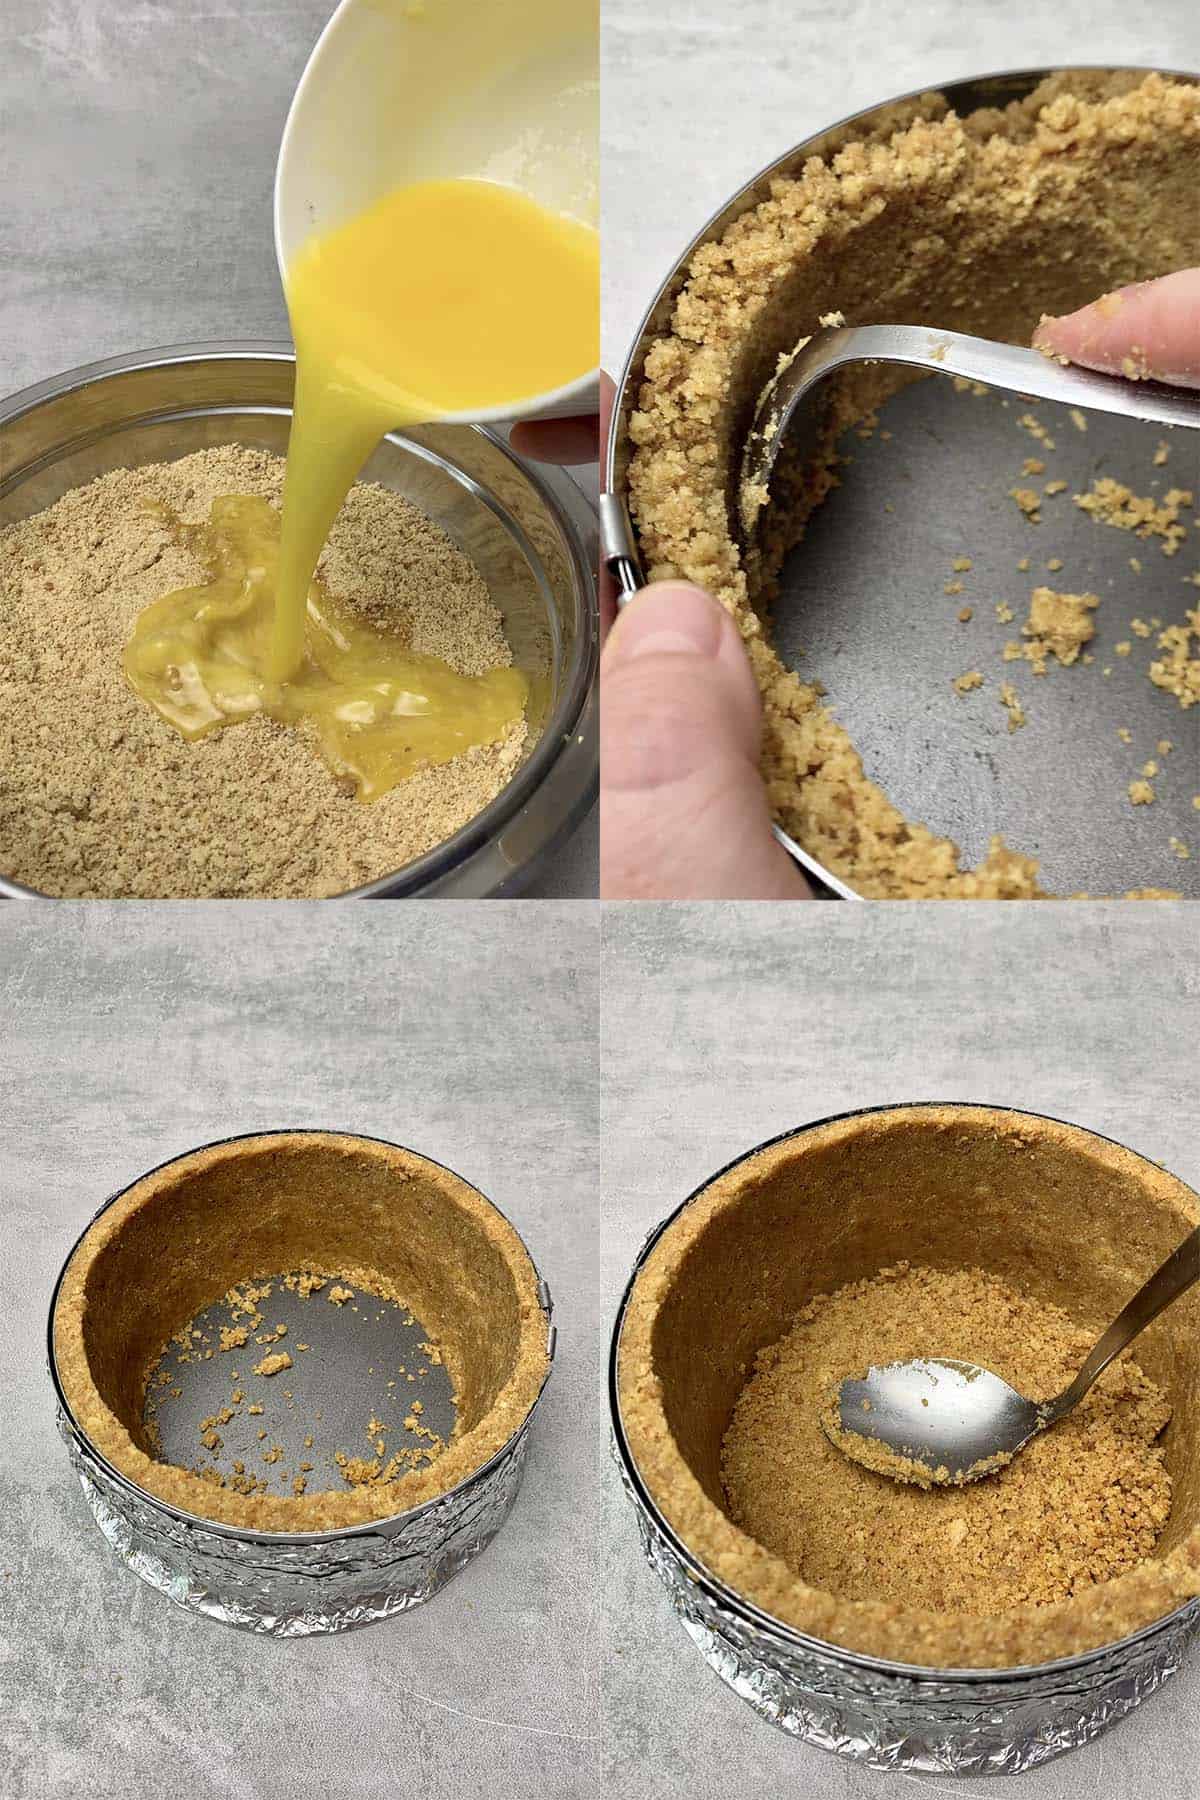 Cheese cake crust step by step assembly process.